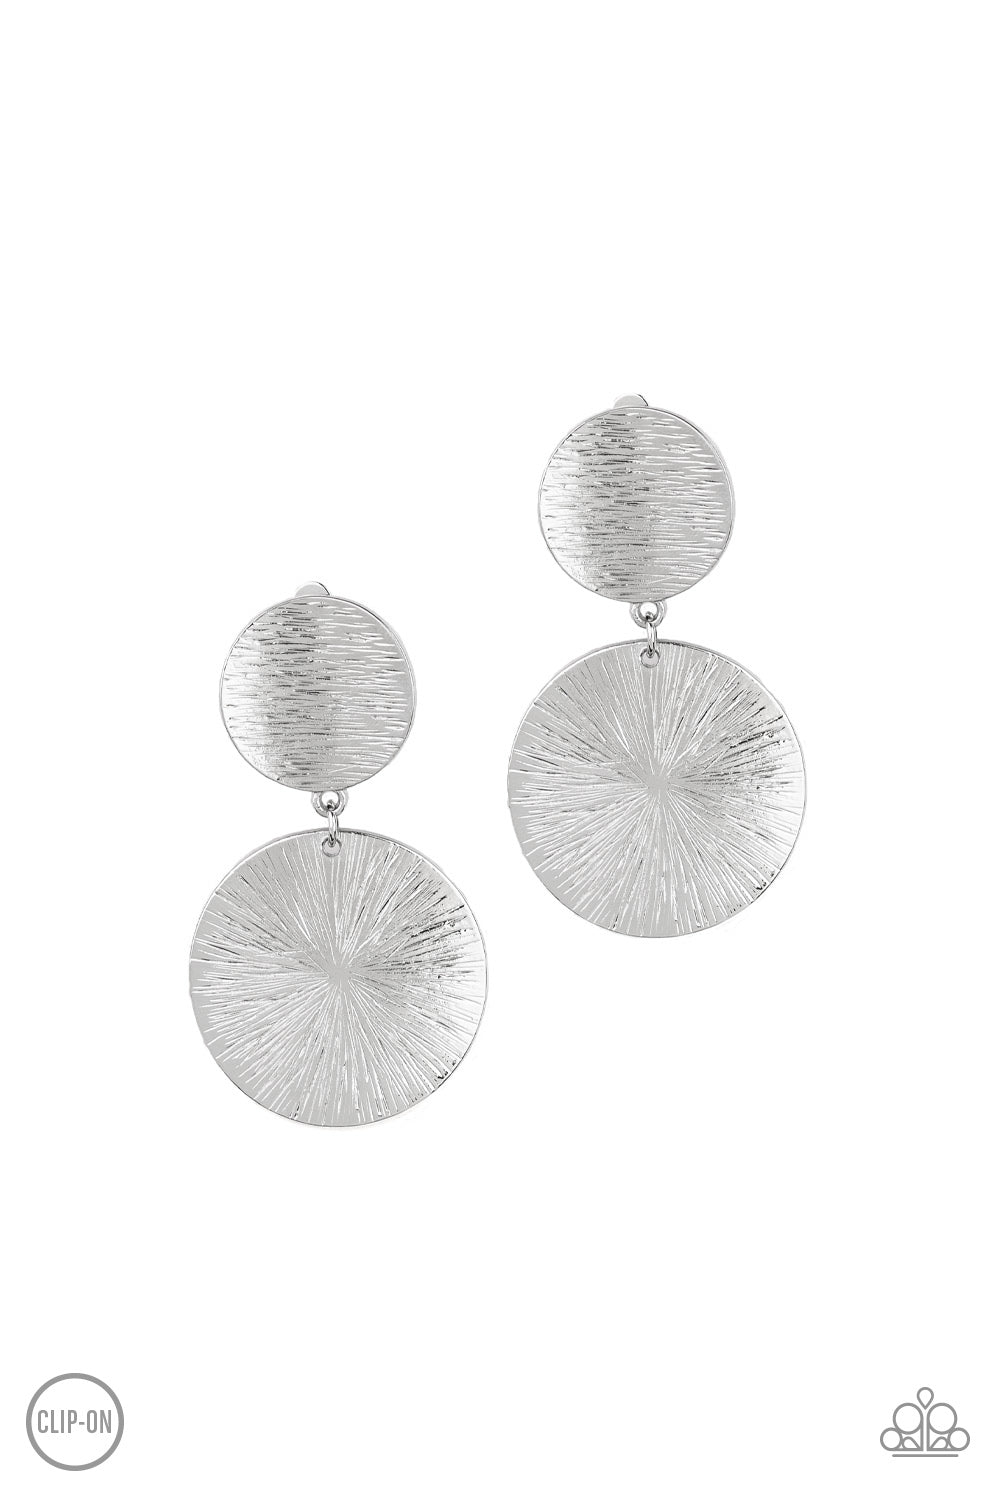 BRIGHT On Cue Silver Clip-On Earring - Paparazzi Accessories Item #E115 Streaked in shimmery linear textures, a beveled silver disc gives way to a larger beveled disc for a refined look. Earring attaches to a standard clip on fitting. All Paparazzi Accessories are lead free and nickel free!  Sold as one pair of clip-on earrings.